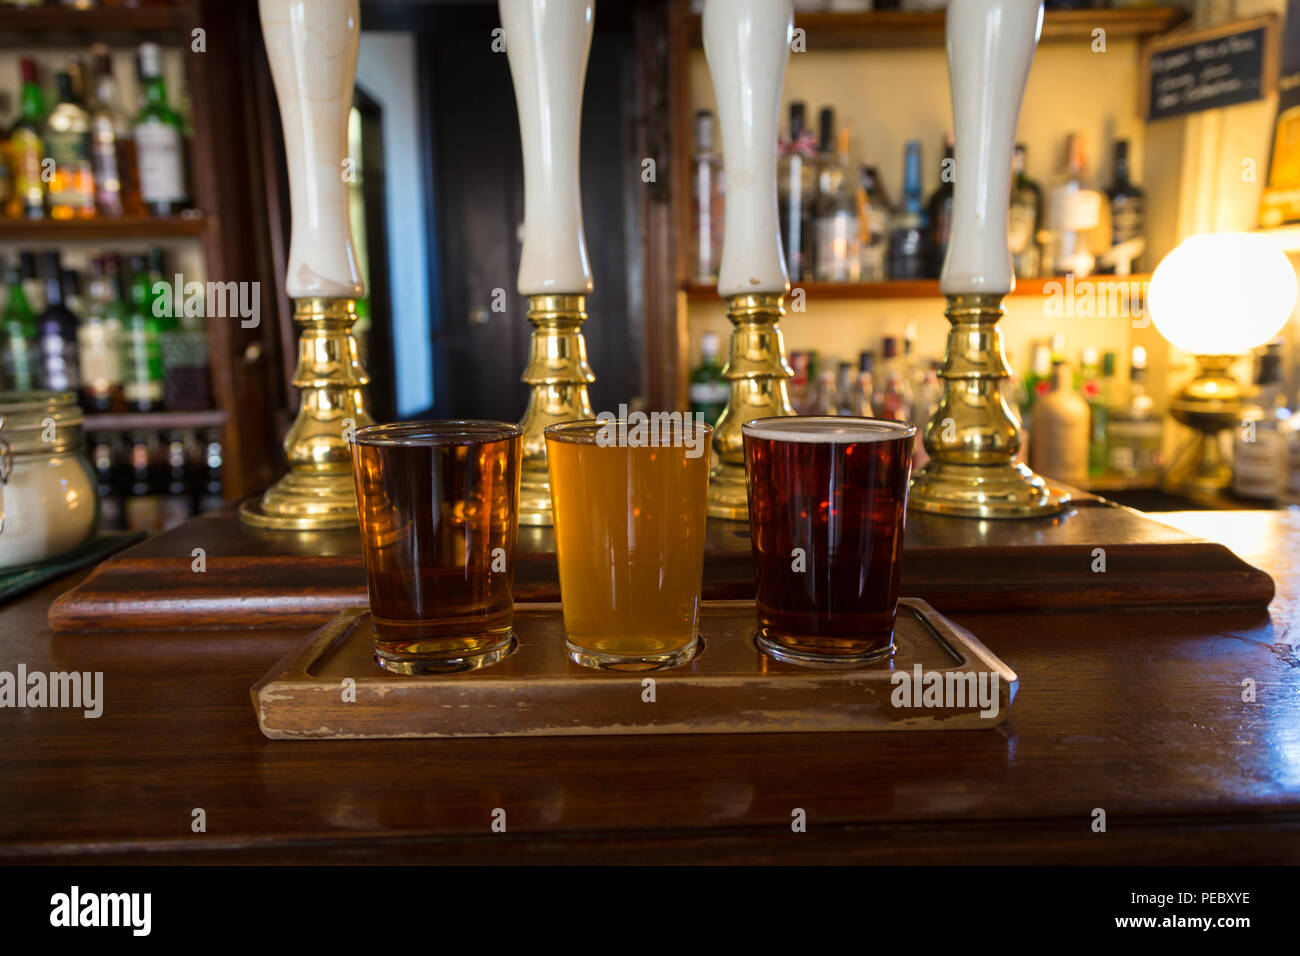 Three glasses of ale or beer in a British pub UK Stock Photo